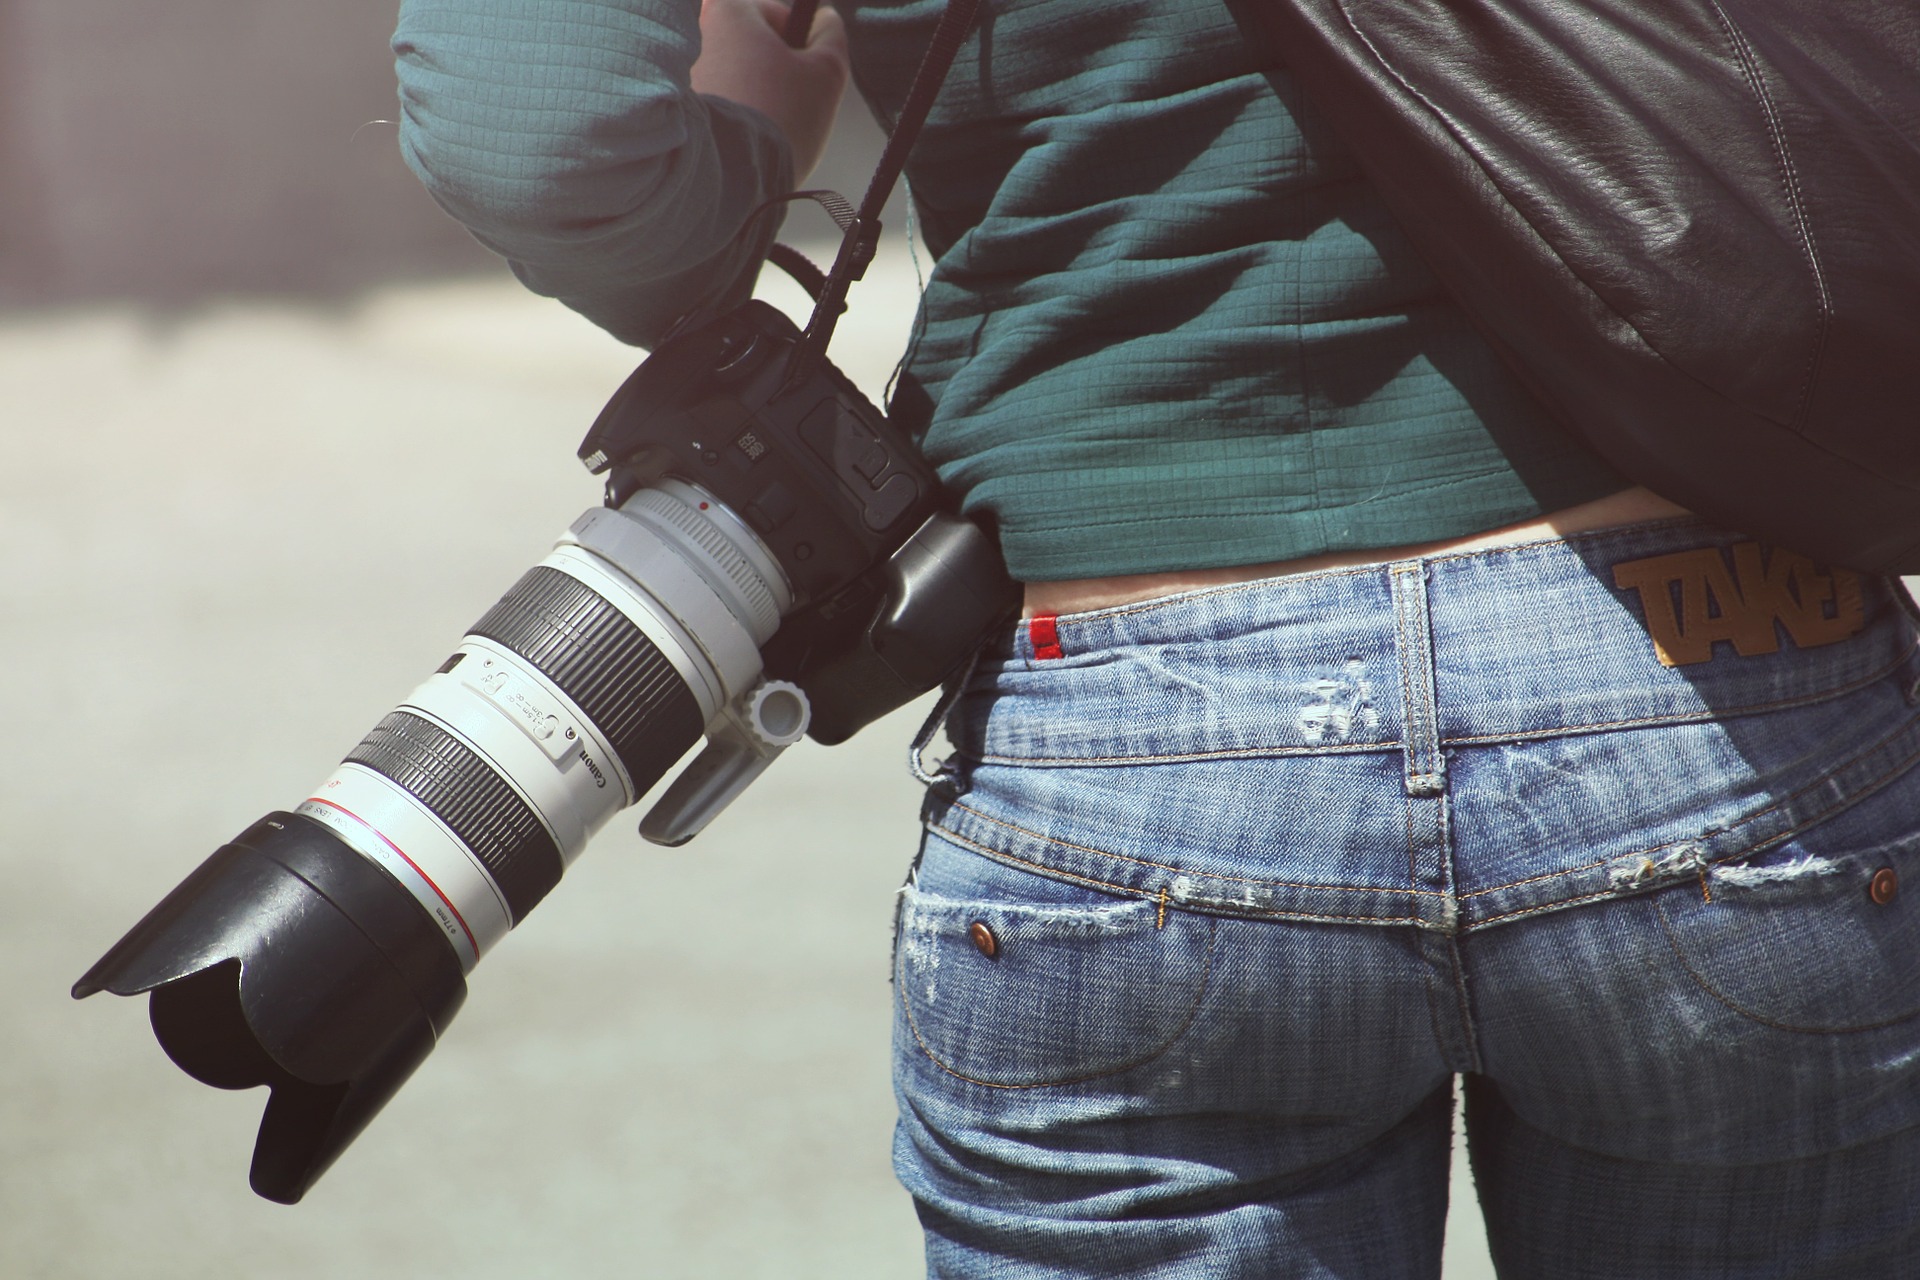 Top 7 Videography Tips For Beginners